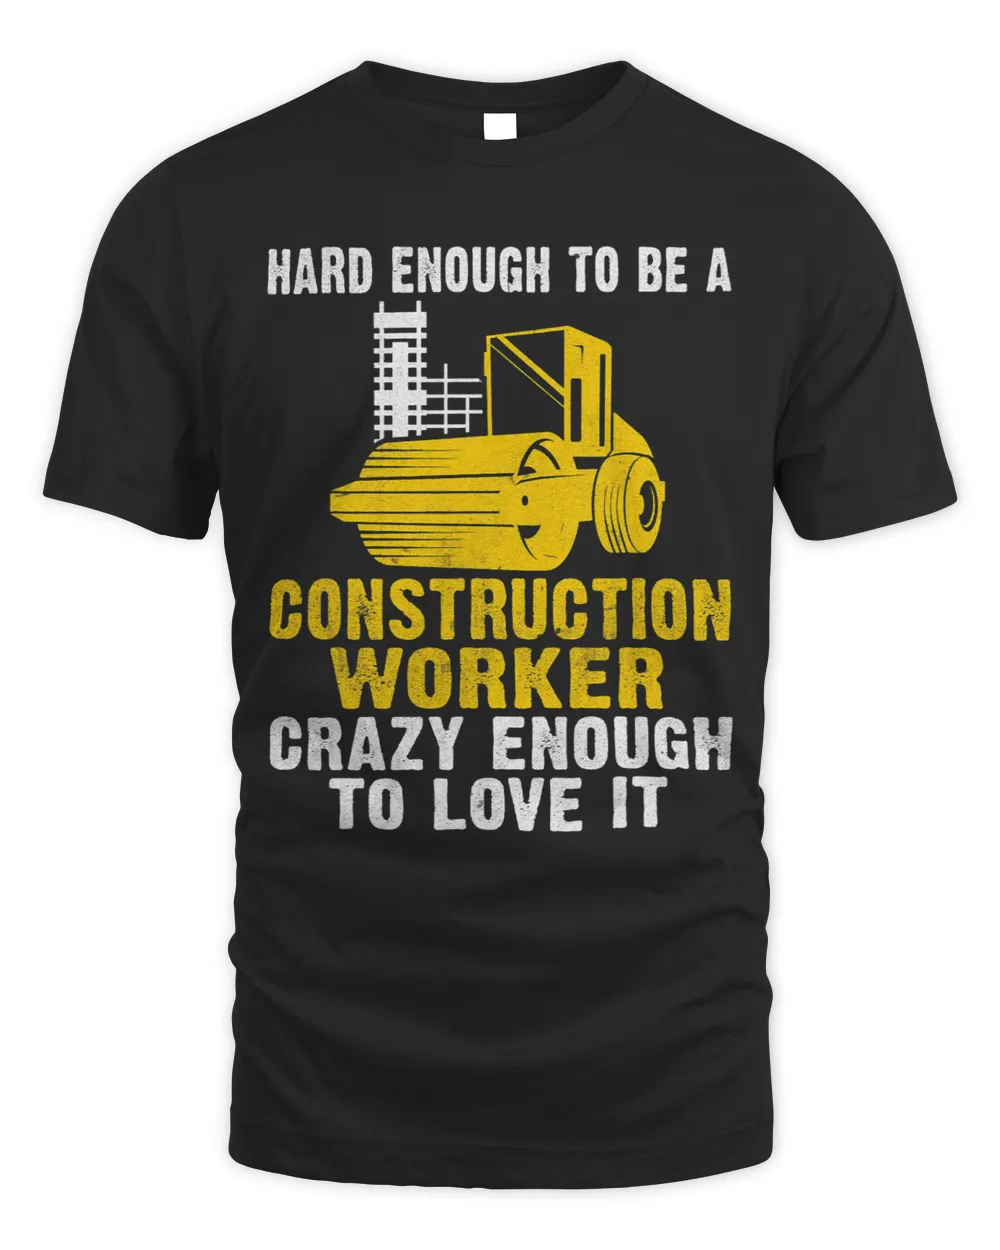 Hard enough to be a Construction Worker crazy enough to love